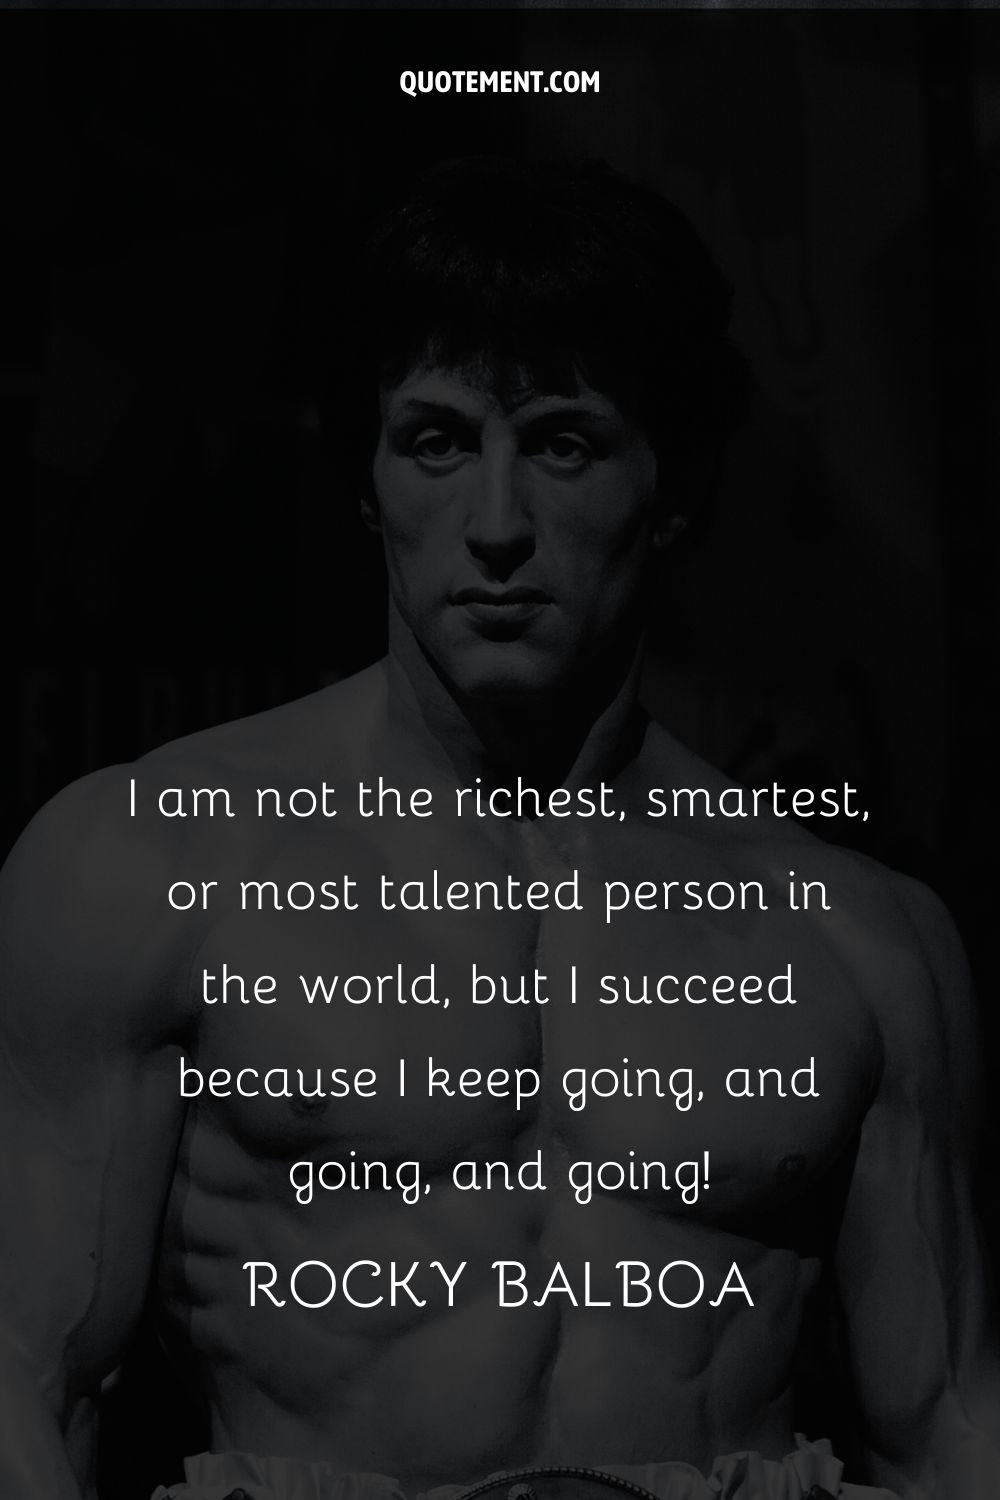 Image of Sylvester Stalone representing the best Rocky quote.